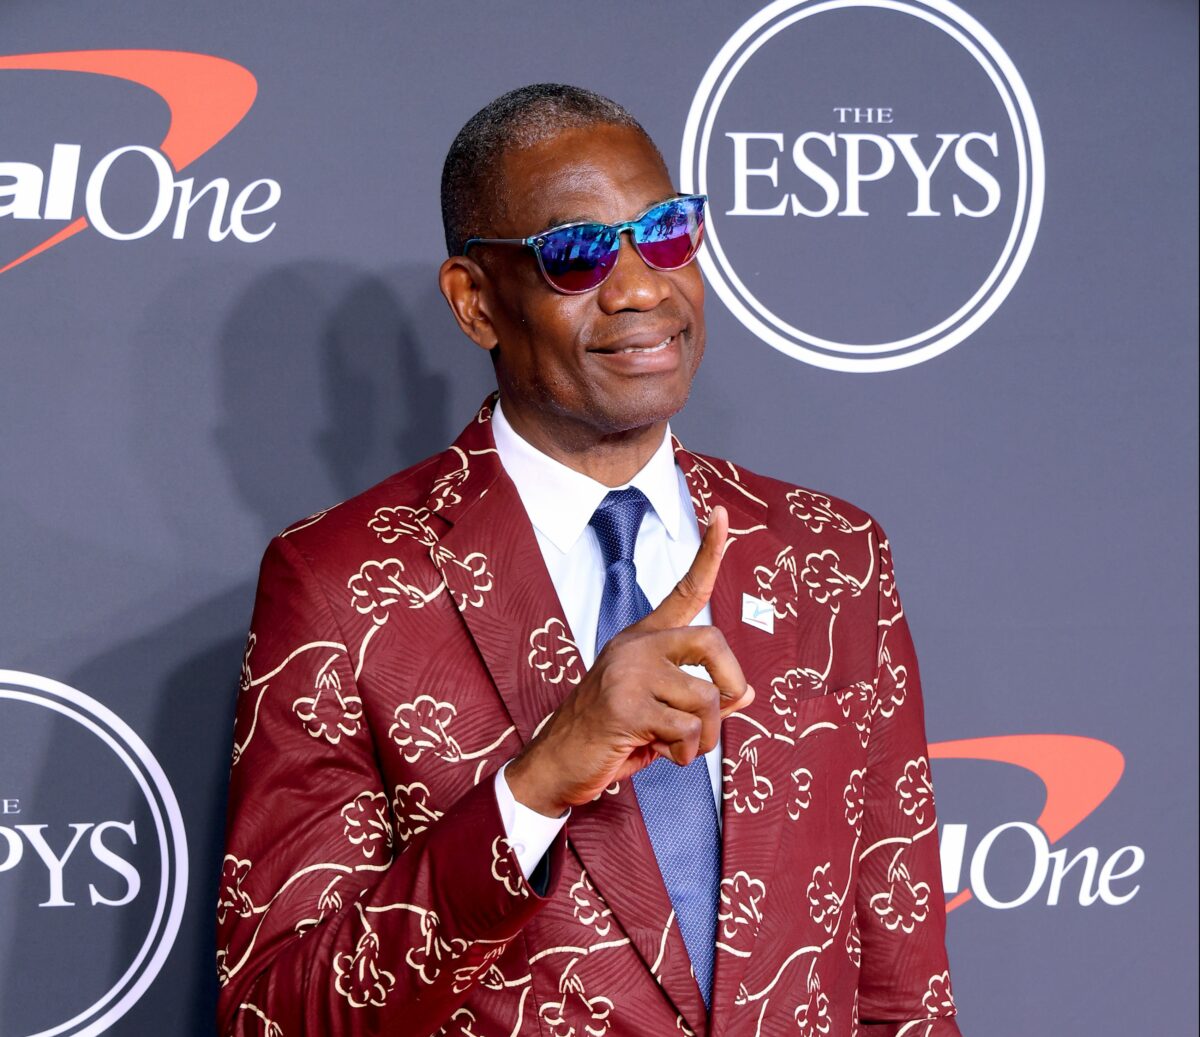 23 glamorous photos from the 2022 ESPYs red carpet